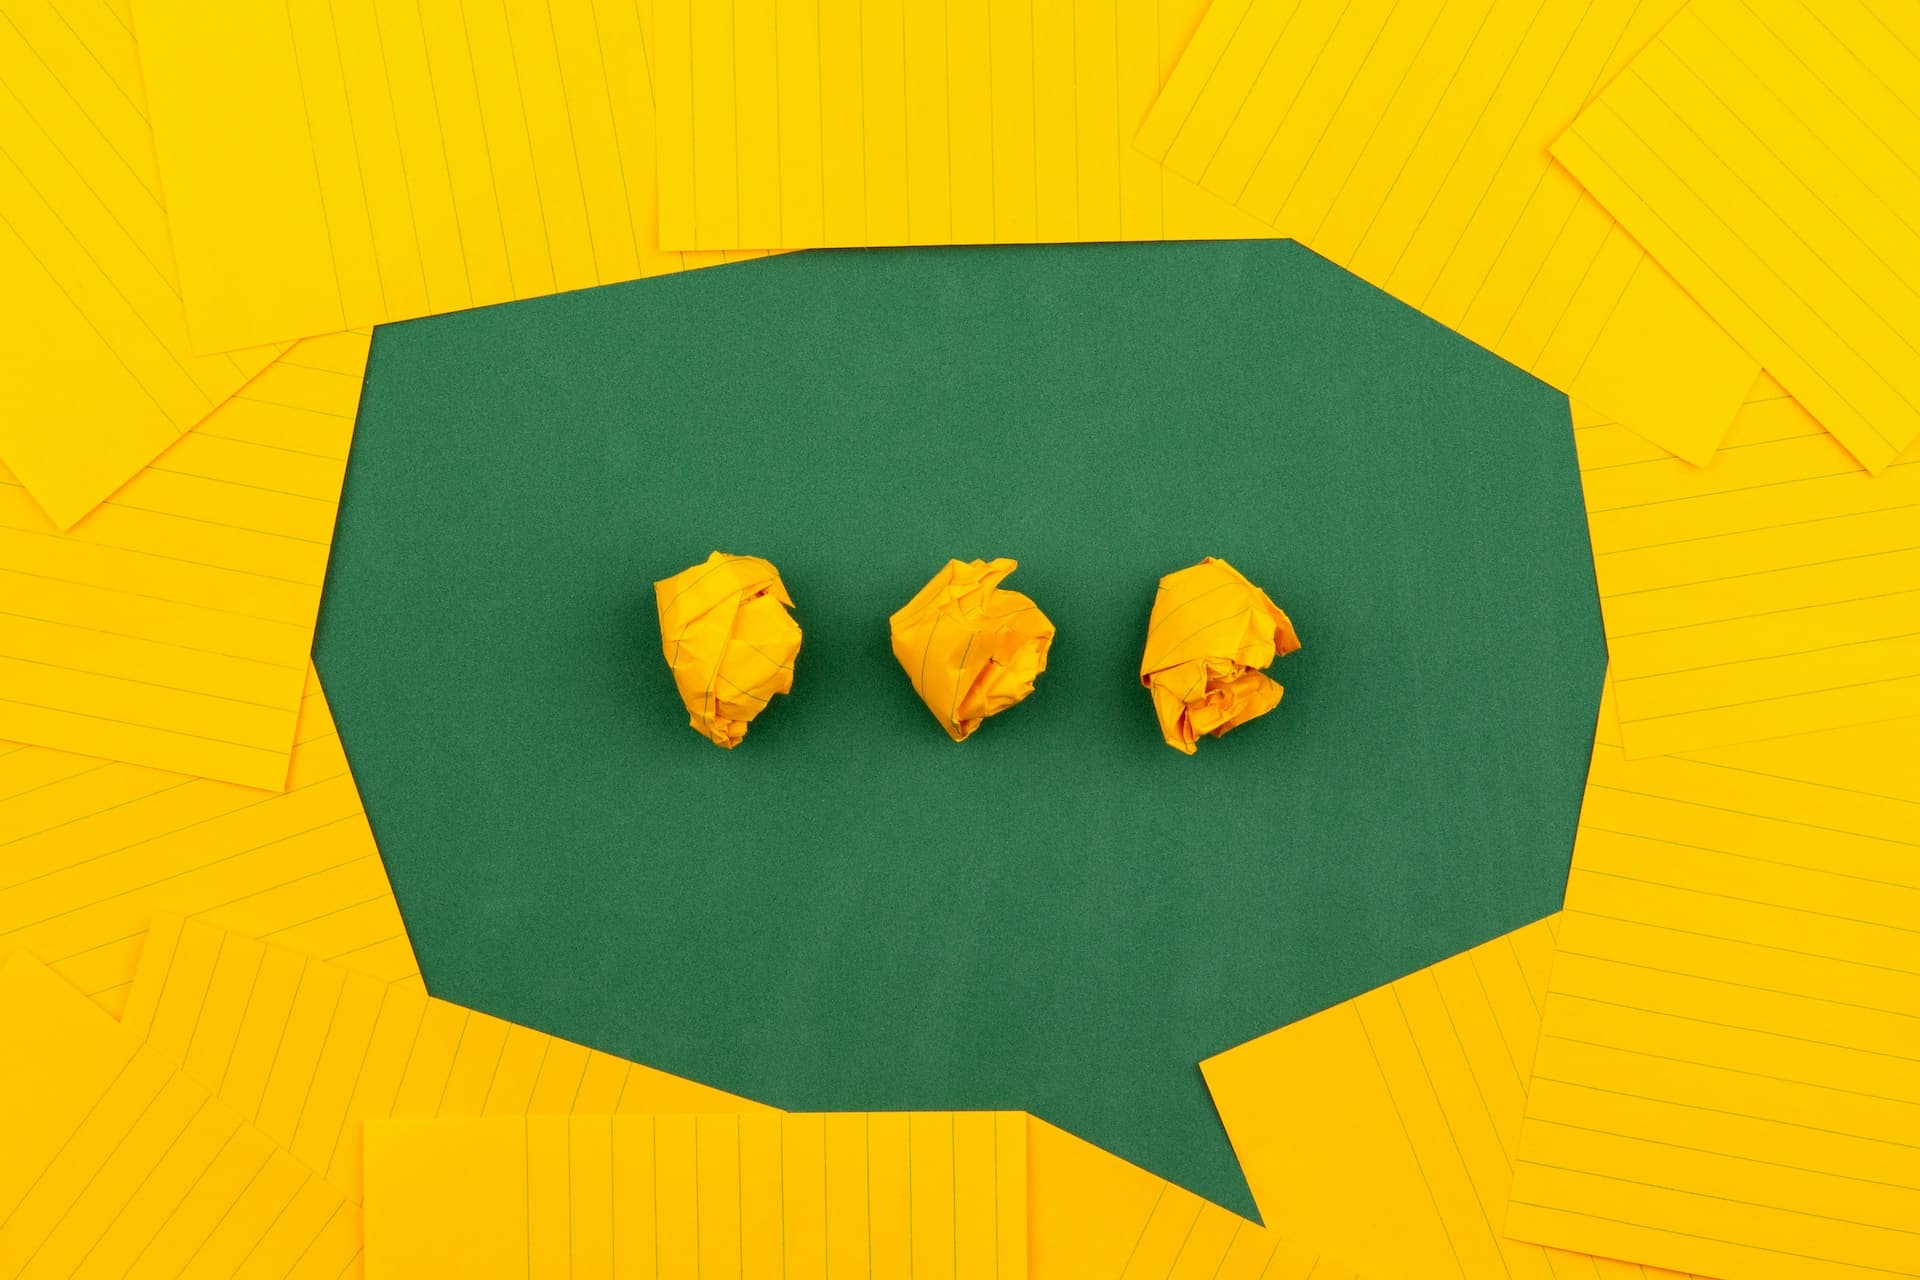 Source:  https://unsplash.com/photos/three-crumpled-yellow-papers-on-green-surface-surrounded-by-yellow-lined-papers-V5vqWC9gyEUTitle: Chatbots for Event Marketing Alt. Title: Chatbots for Event Marketing Description: A funky chat bubble